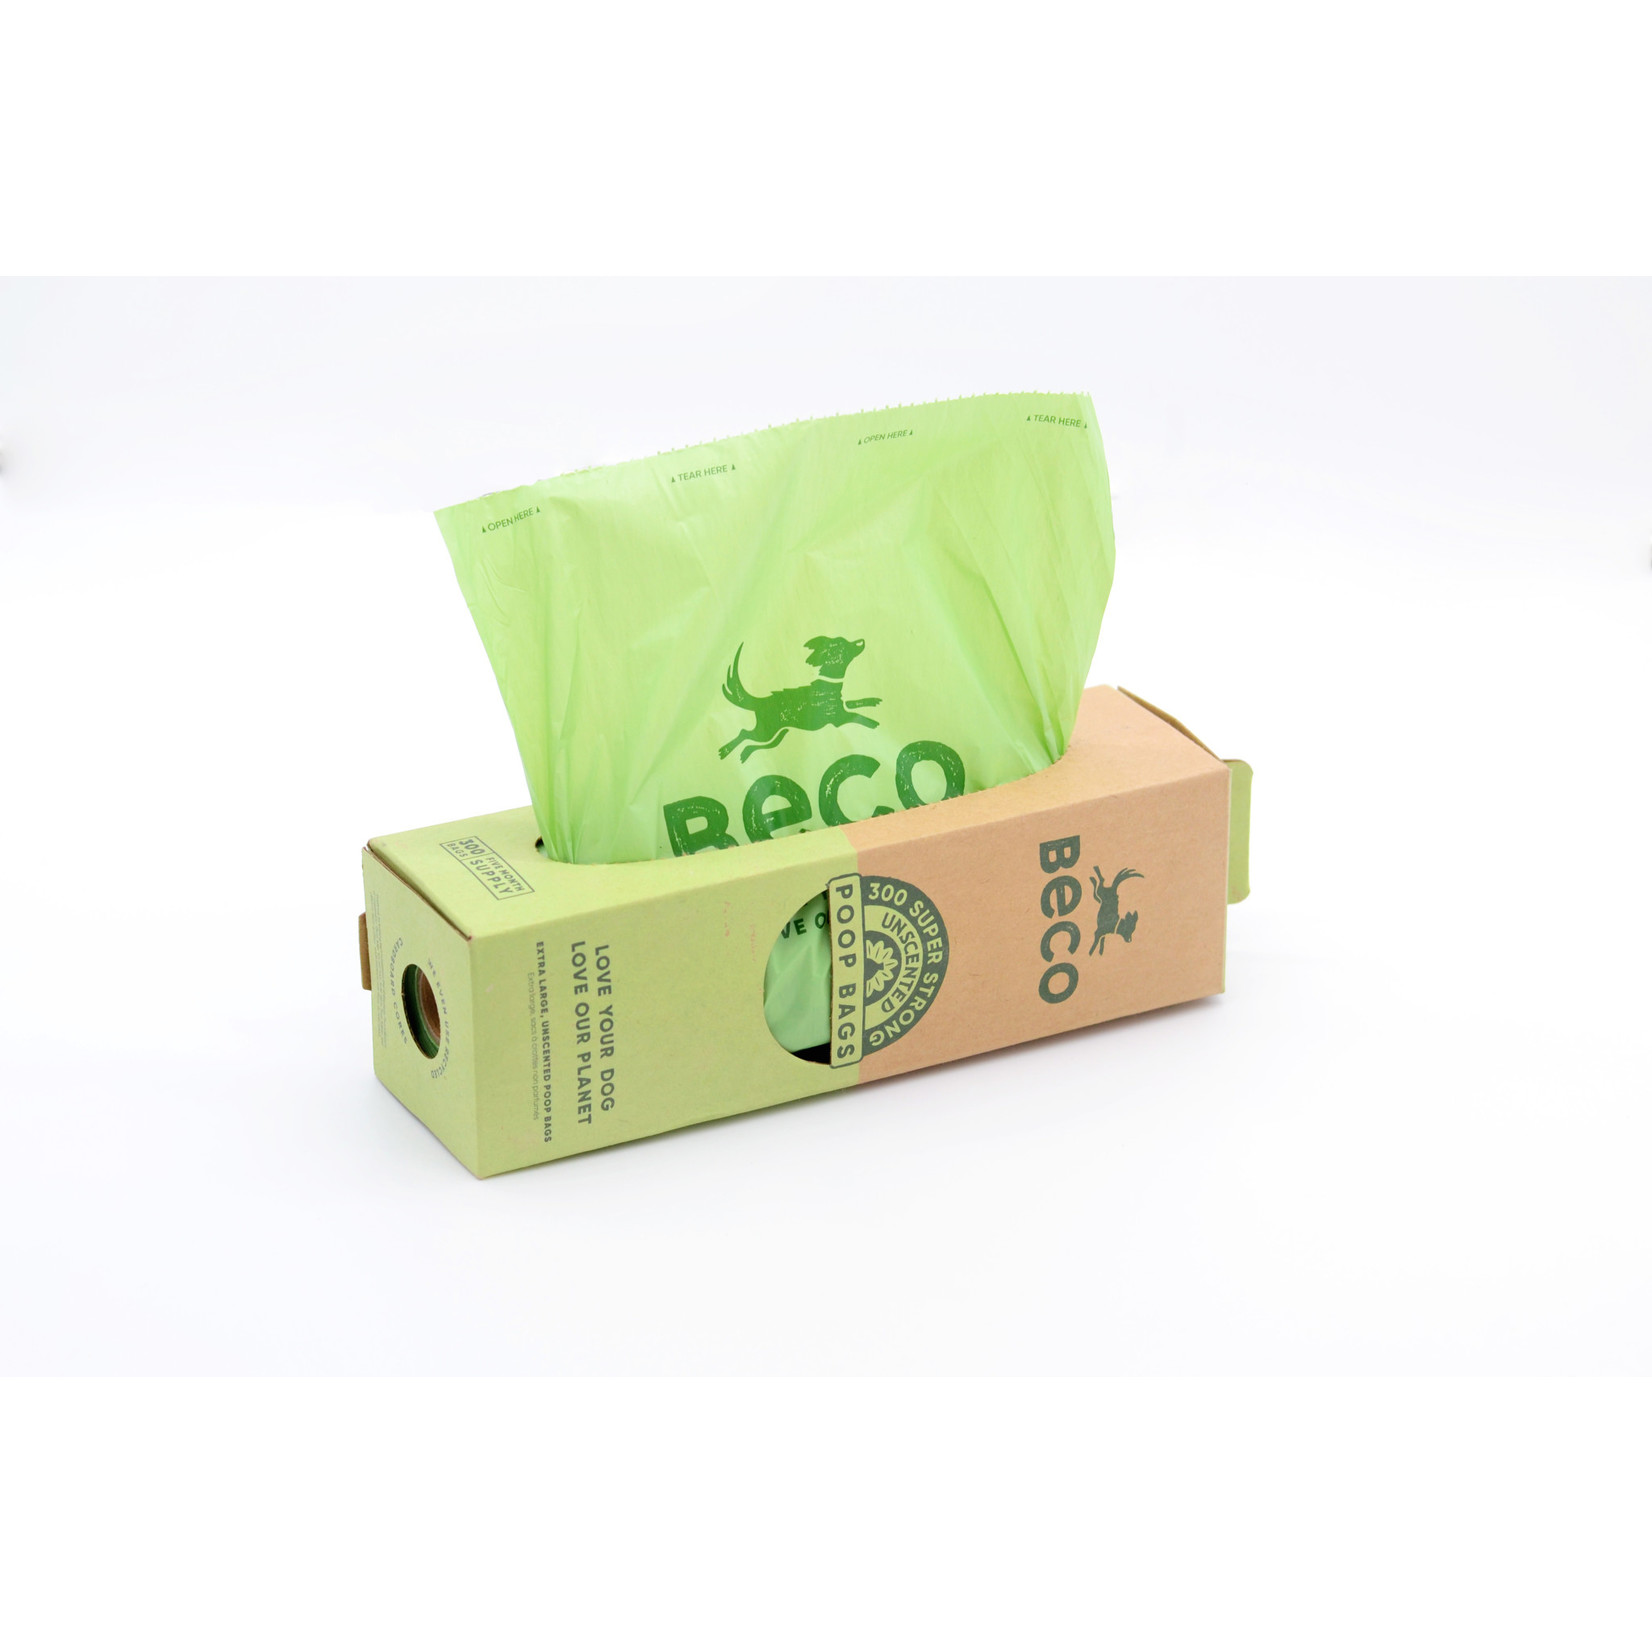 Beco Eco-Friendly Unscented Degradable Poop Bags Dispenser Roll, 300 bags